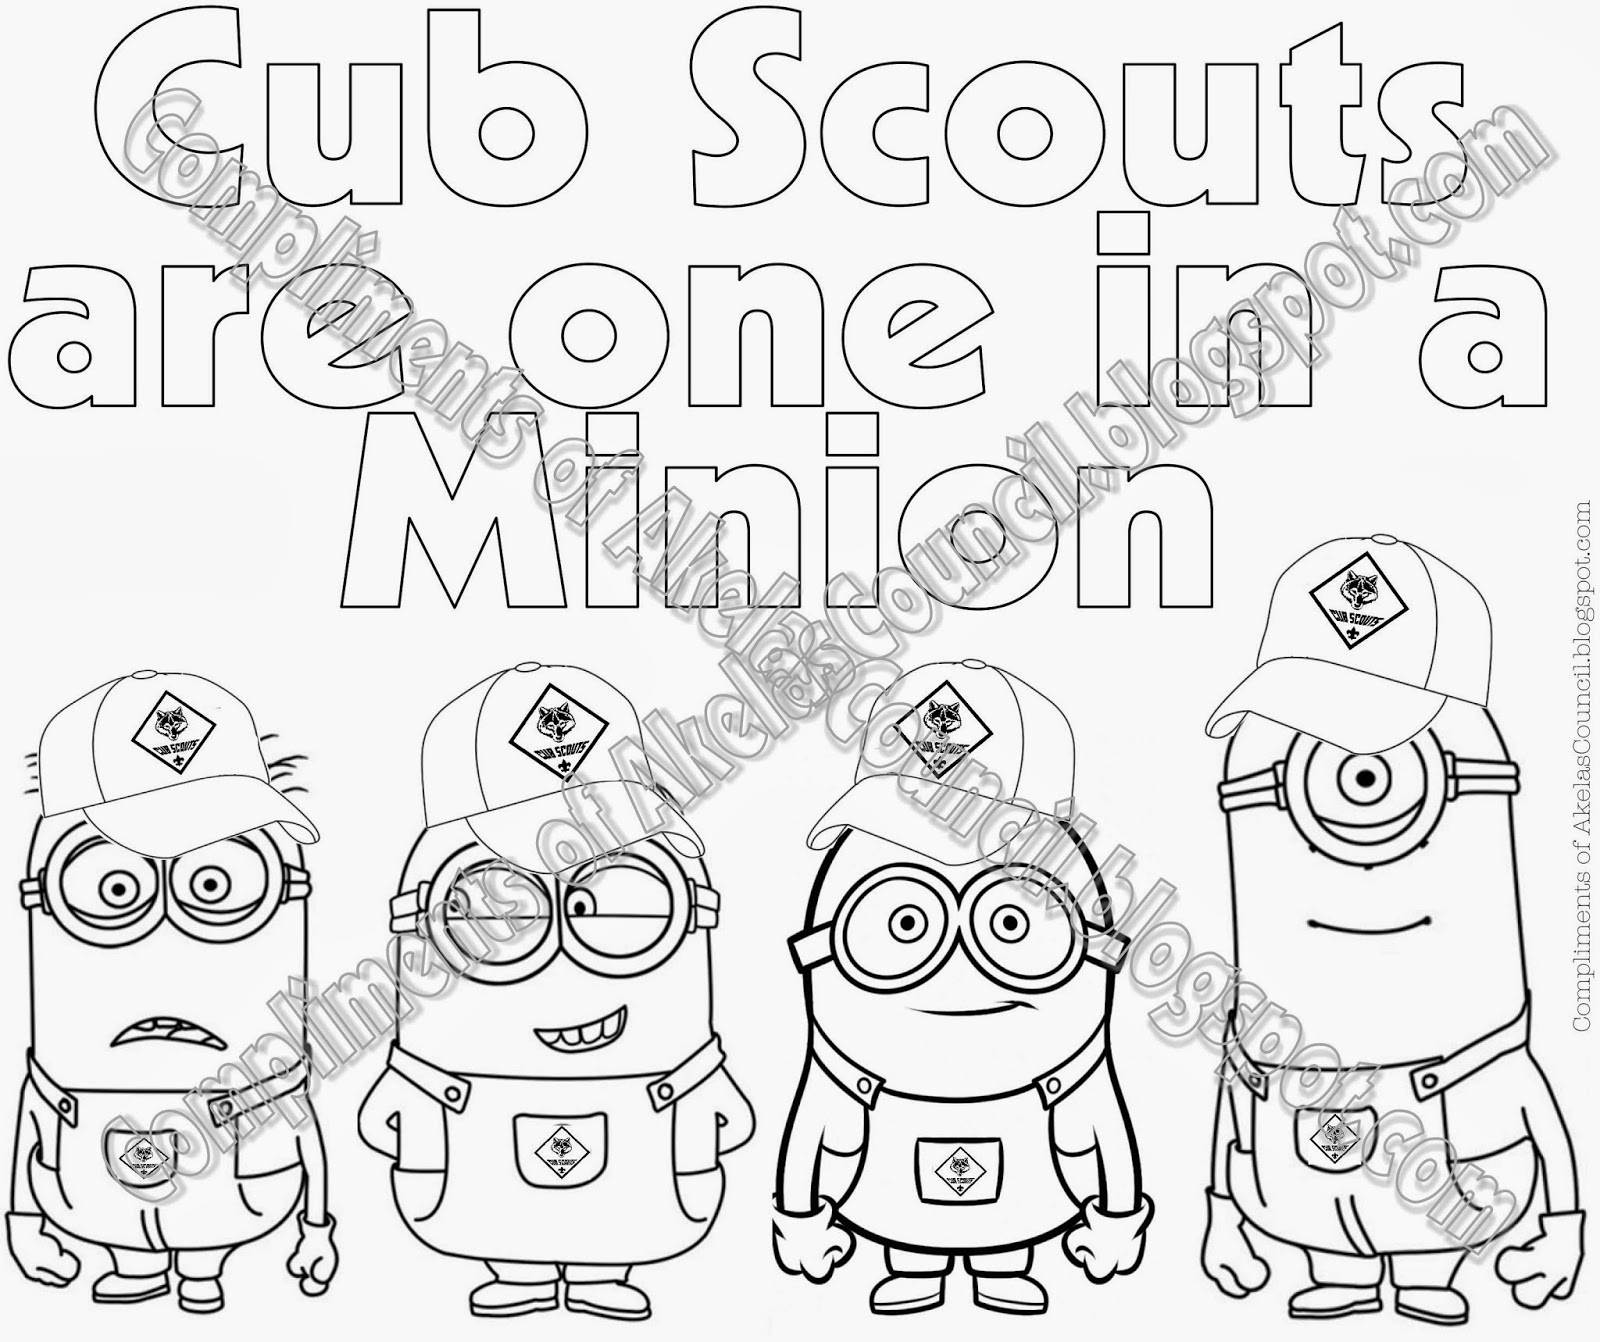 Cub Scout Minions PRINTABLE Coloring Page from Despicable Me Great Table Decoration for the Blue & Gold Banquet